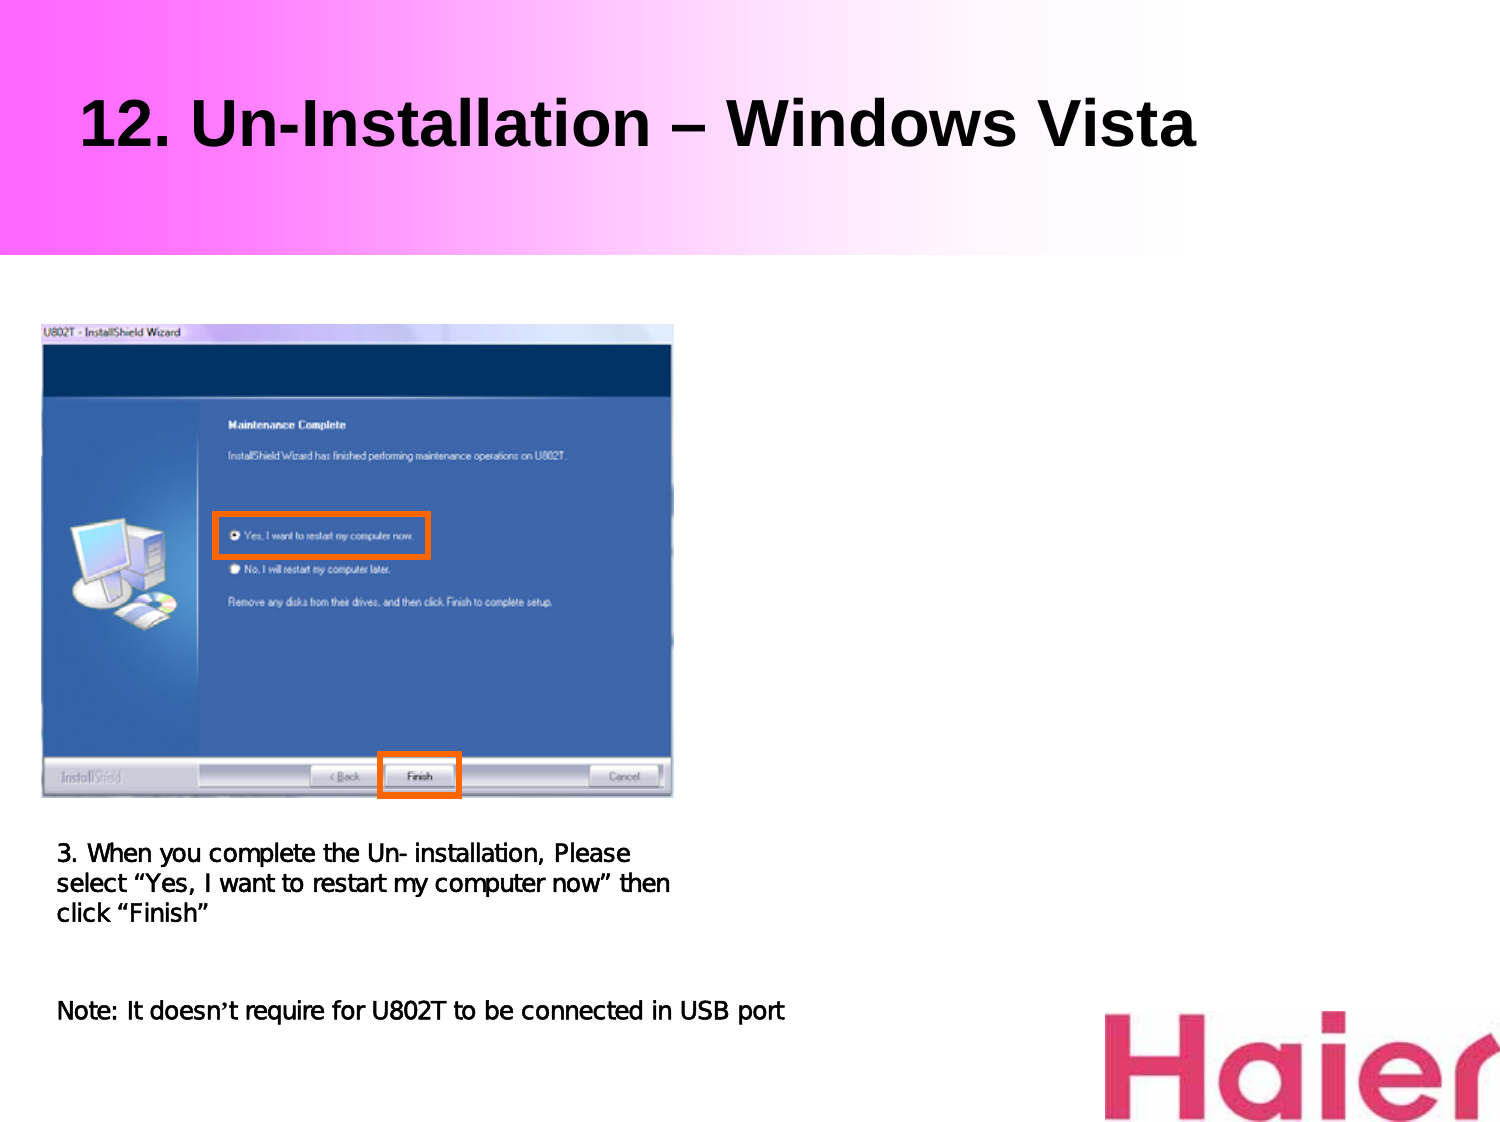 12. Un-Installation – Windows Vista3. When you complete the Un-installation, Please select “Yes, I want to restart my computer now” then click “Finish”Note: It doesn’t require for U802T to be connected in USB port